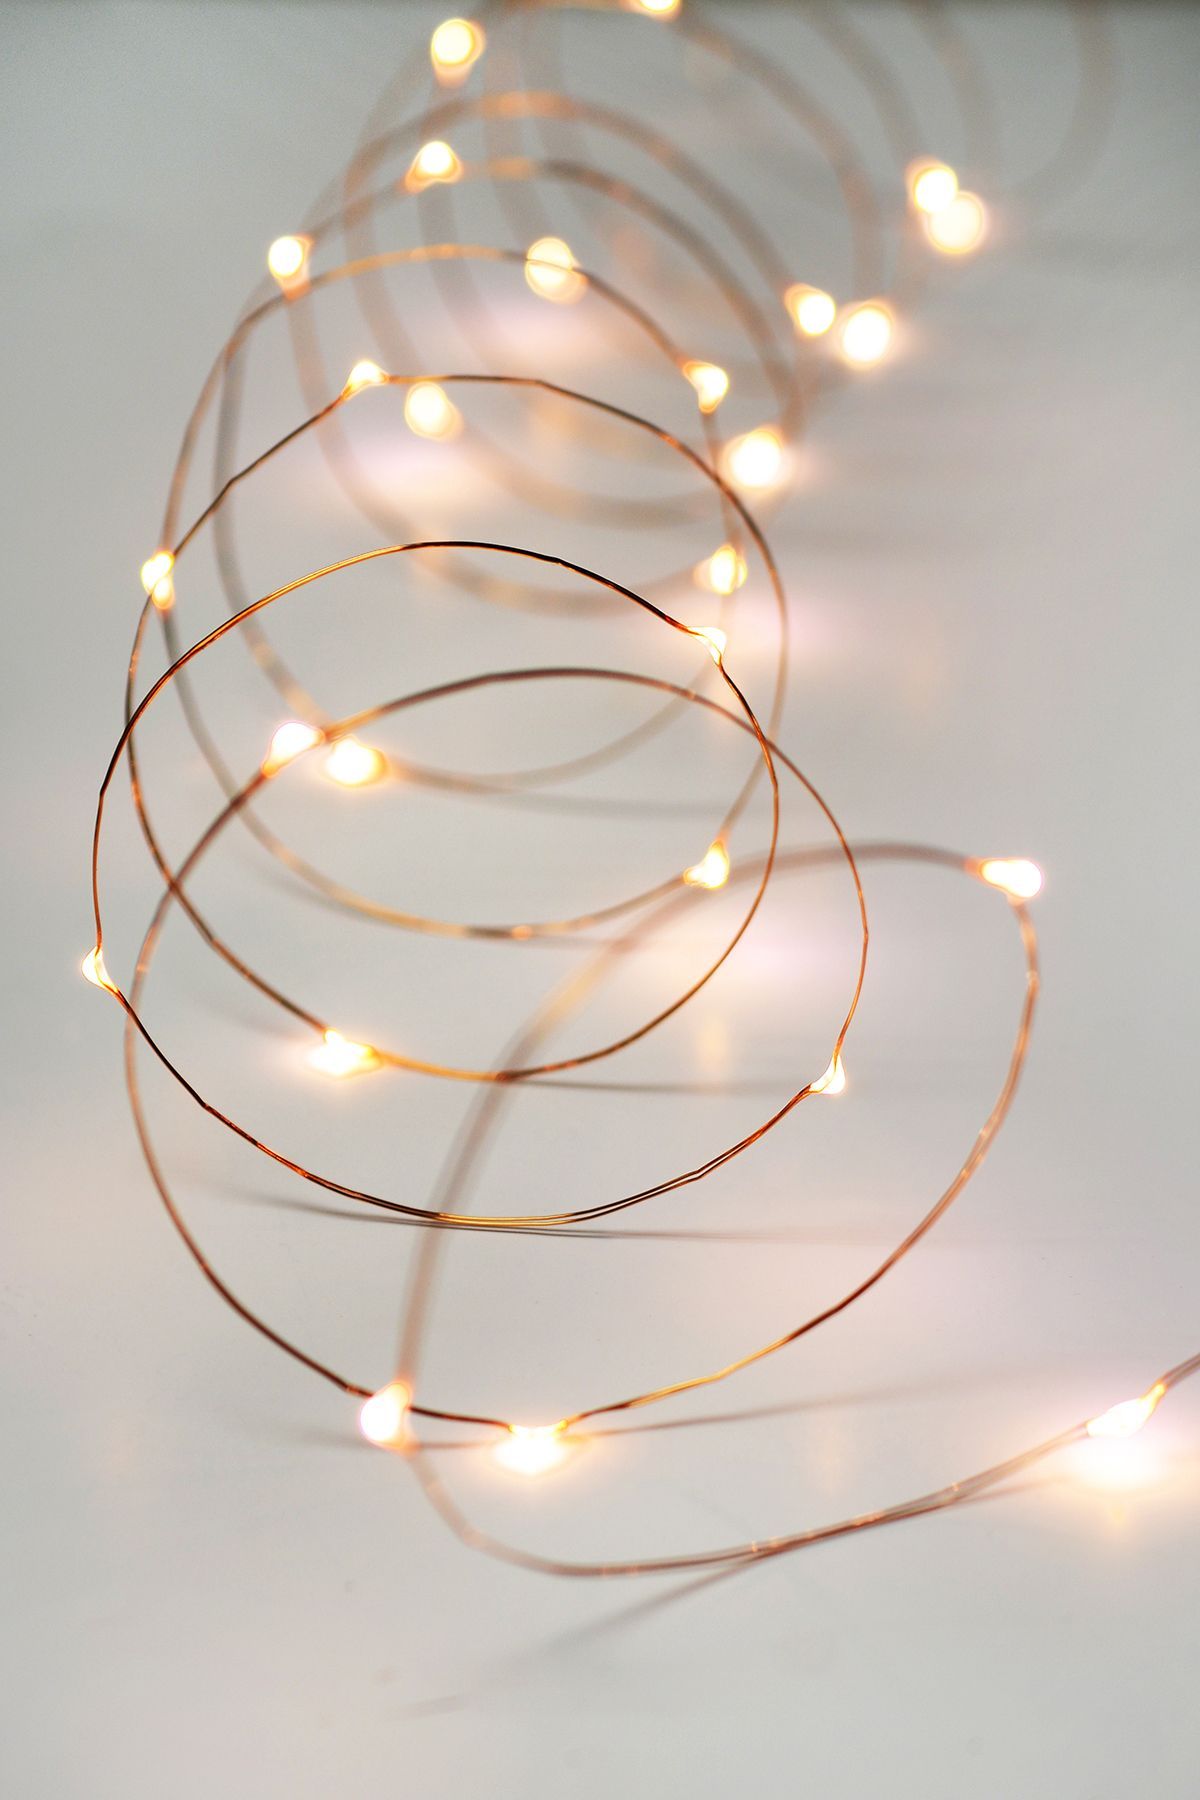 Copper Wire Fairy Lights 10 FT Outdoor Battery Operated Warm White